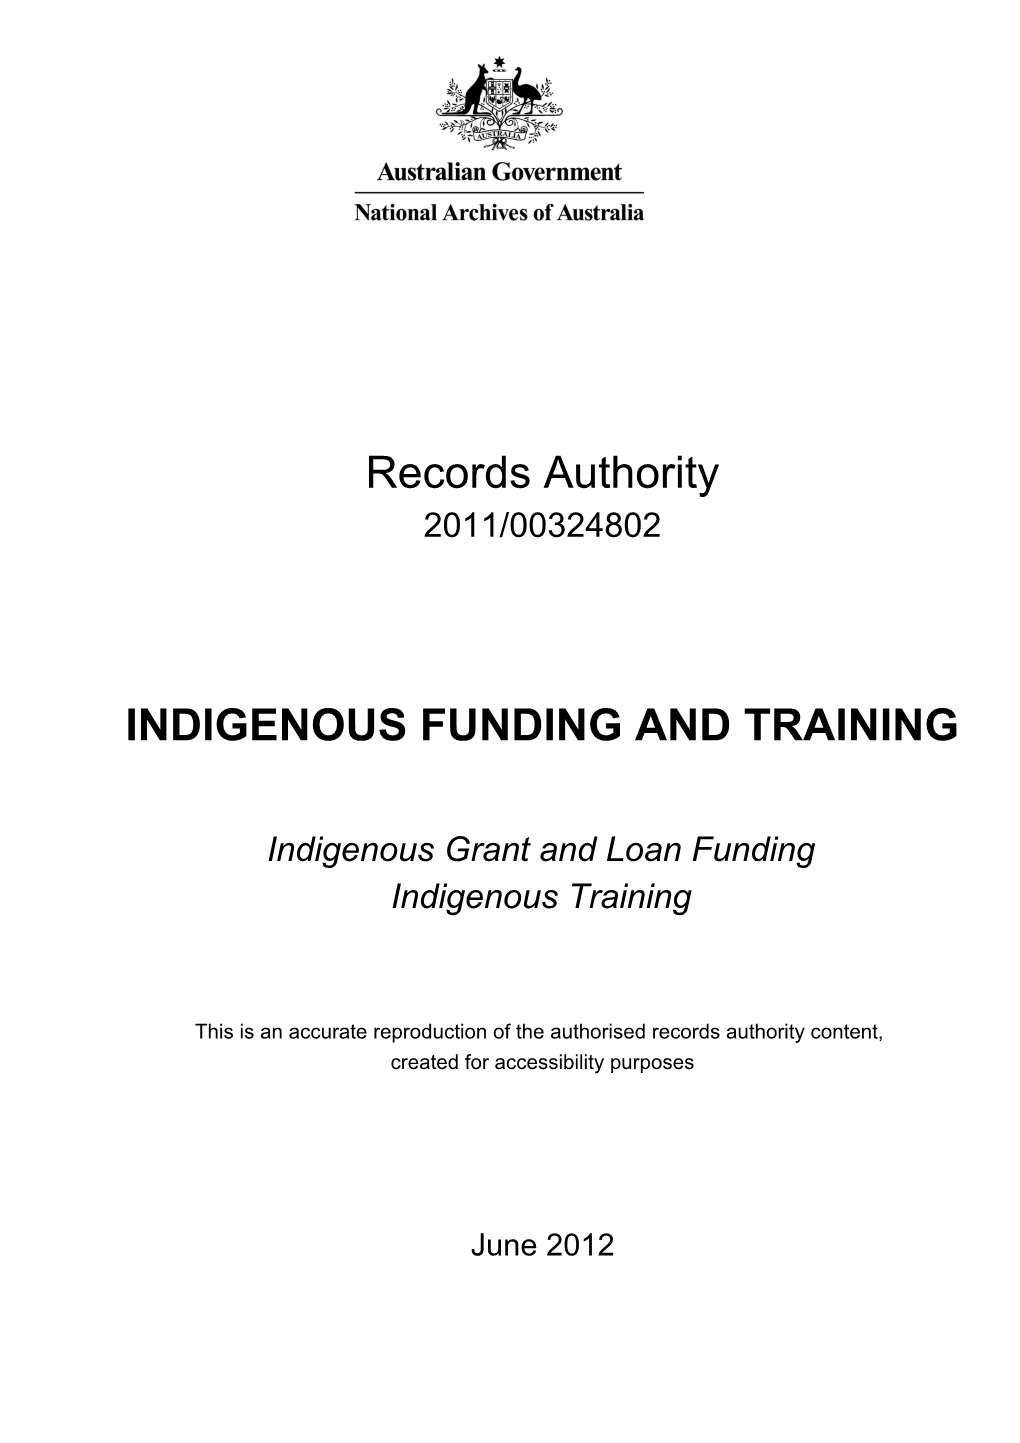 Indigenous Funding And Training Record Authority 2011/00324802